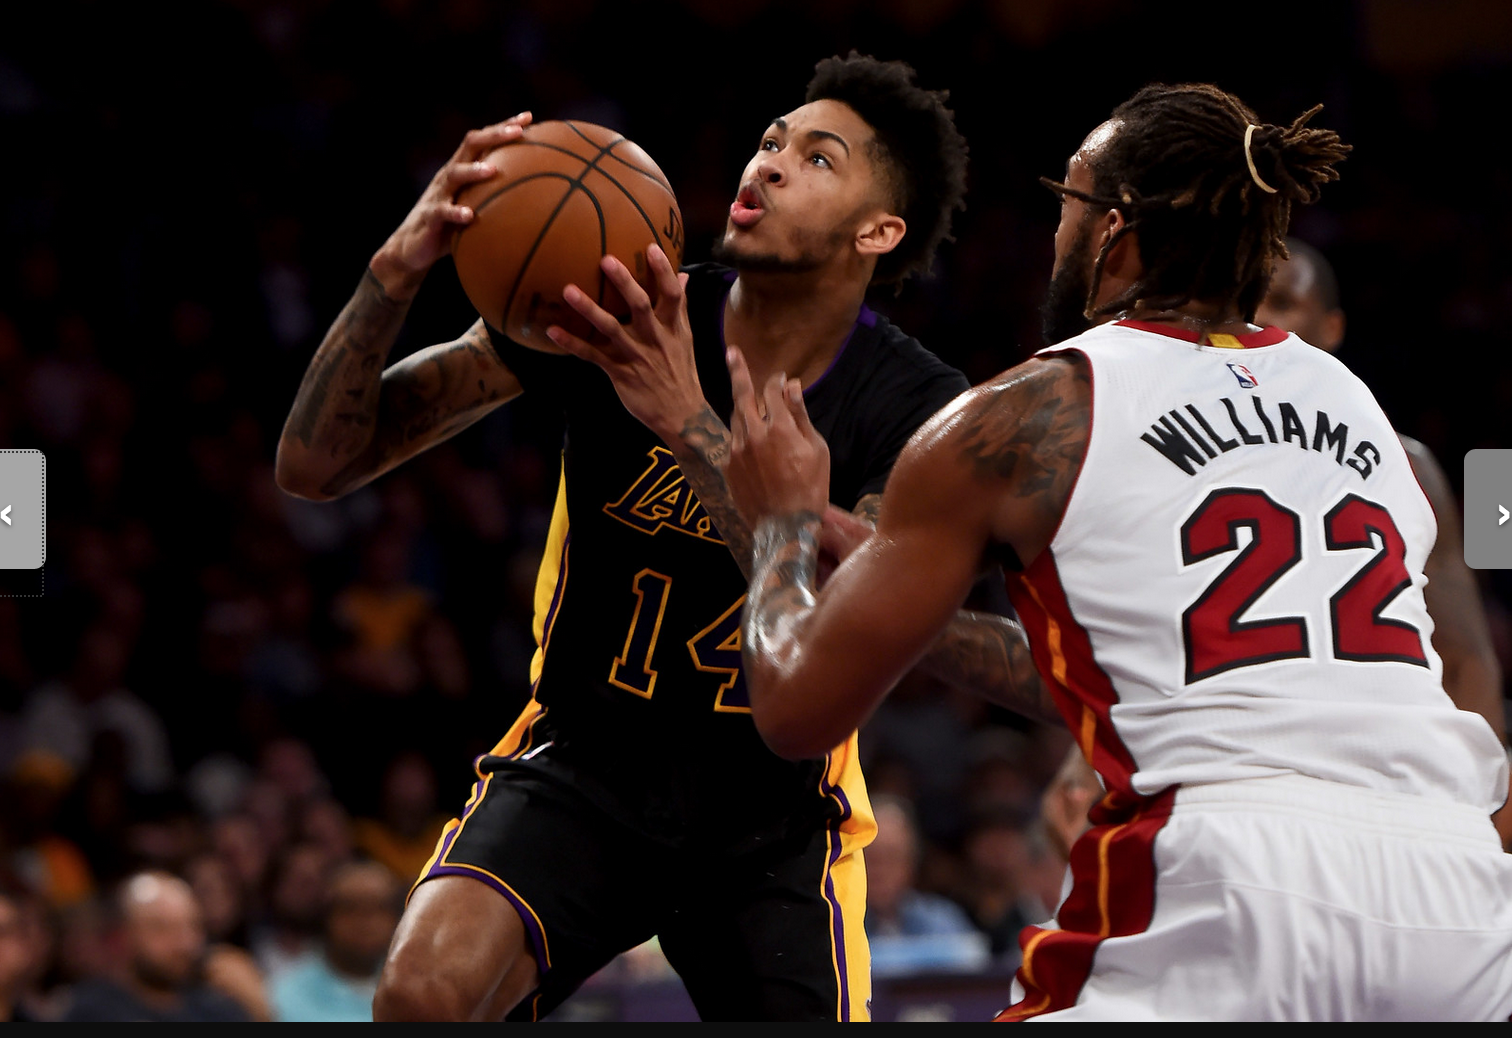 Lakers rookie forward Brandon Ingram has attacked the basket more in recent games. (Photo by Hans Gutknecht, Los Angeles Daily News/SCNG)